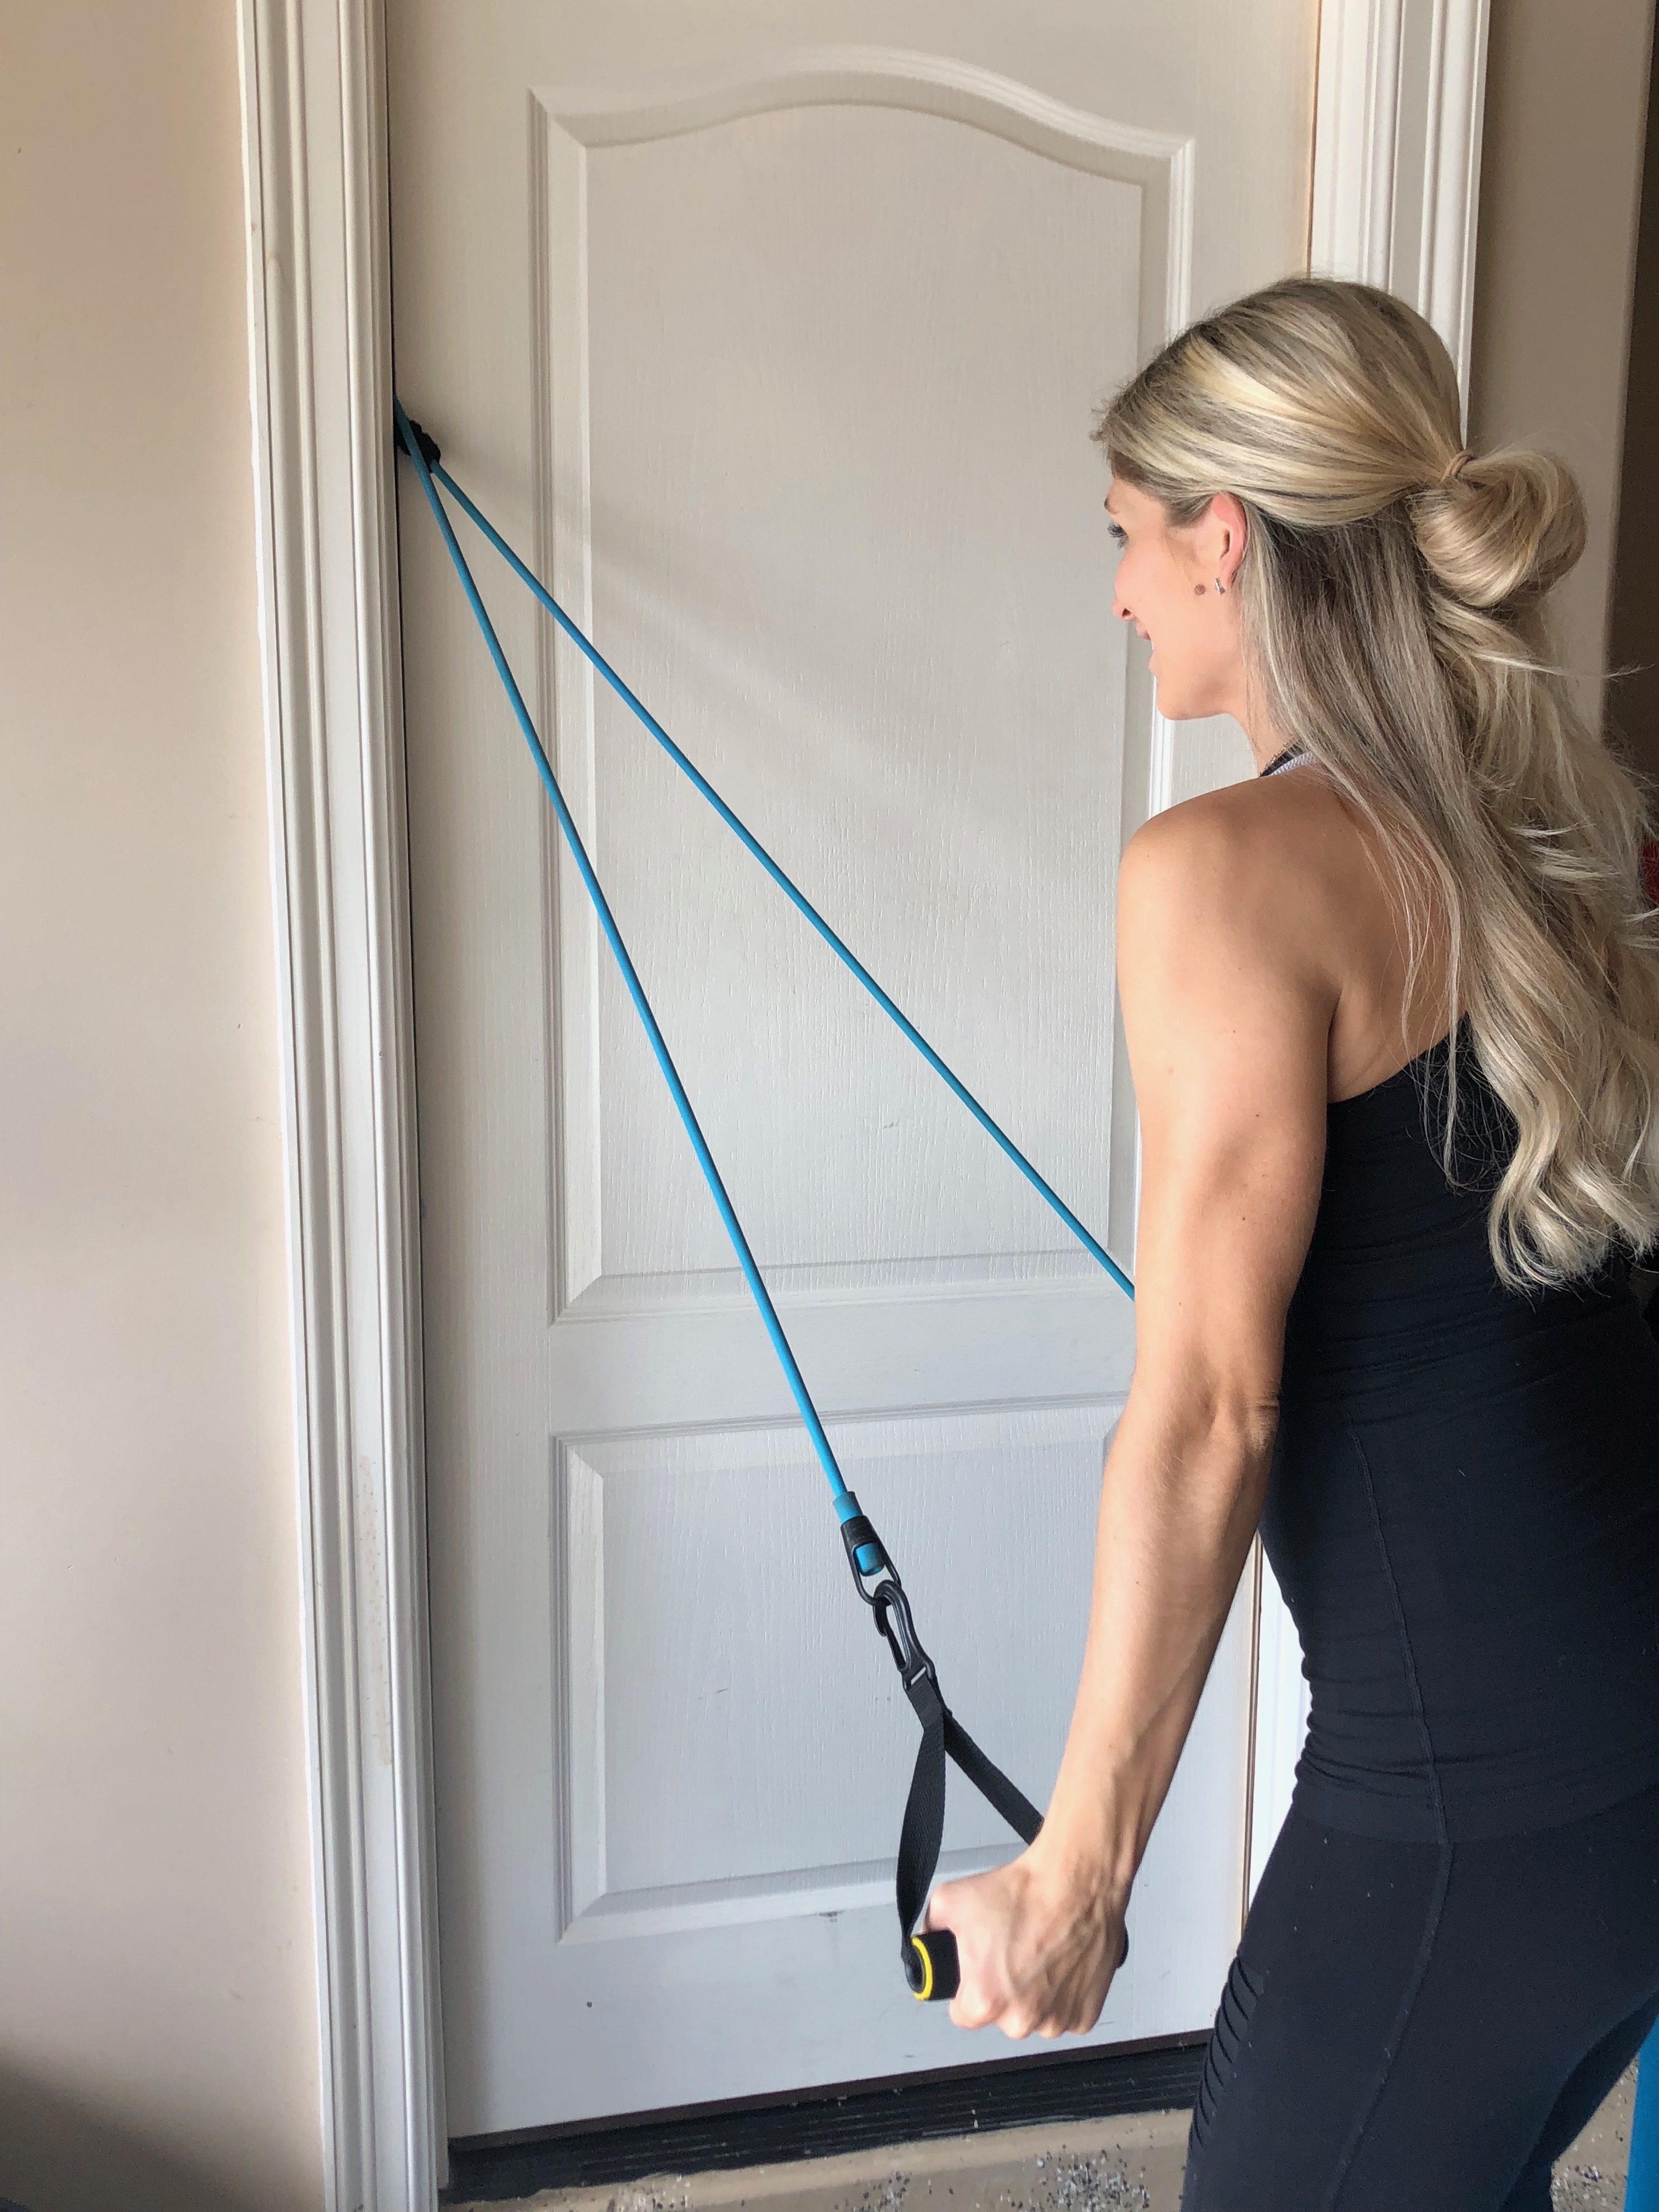 lauren gleisberg doing a resistance band workout at home